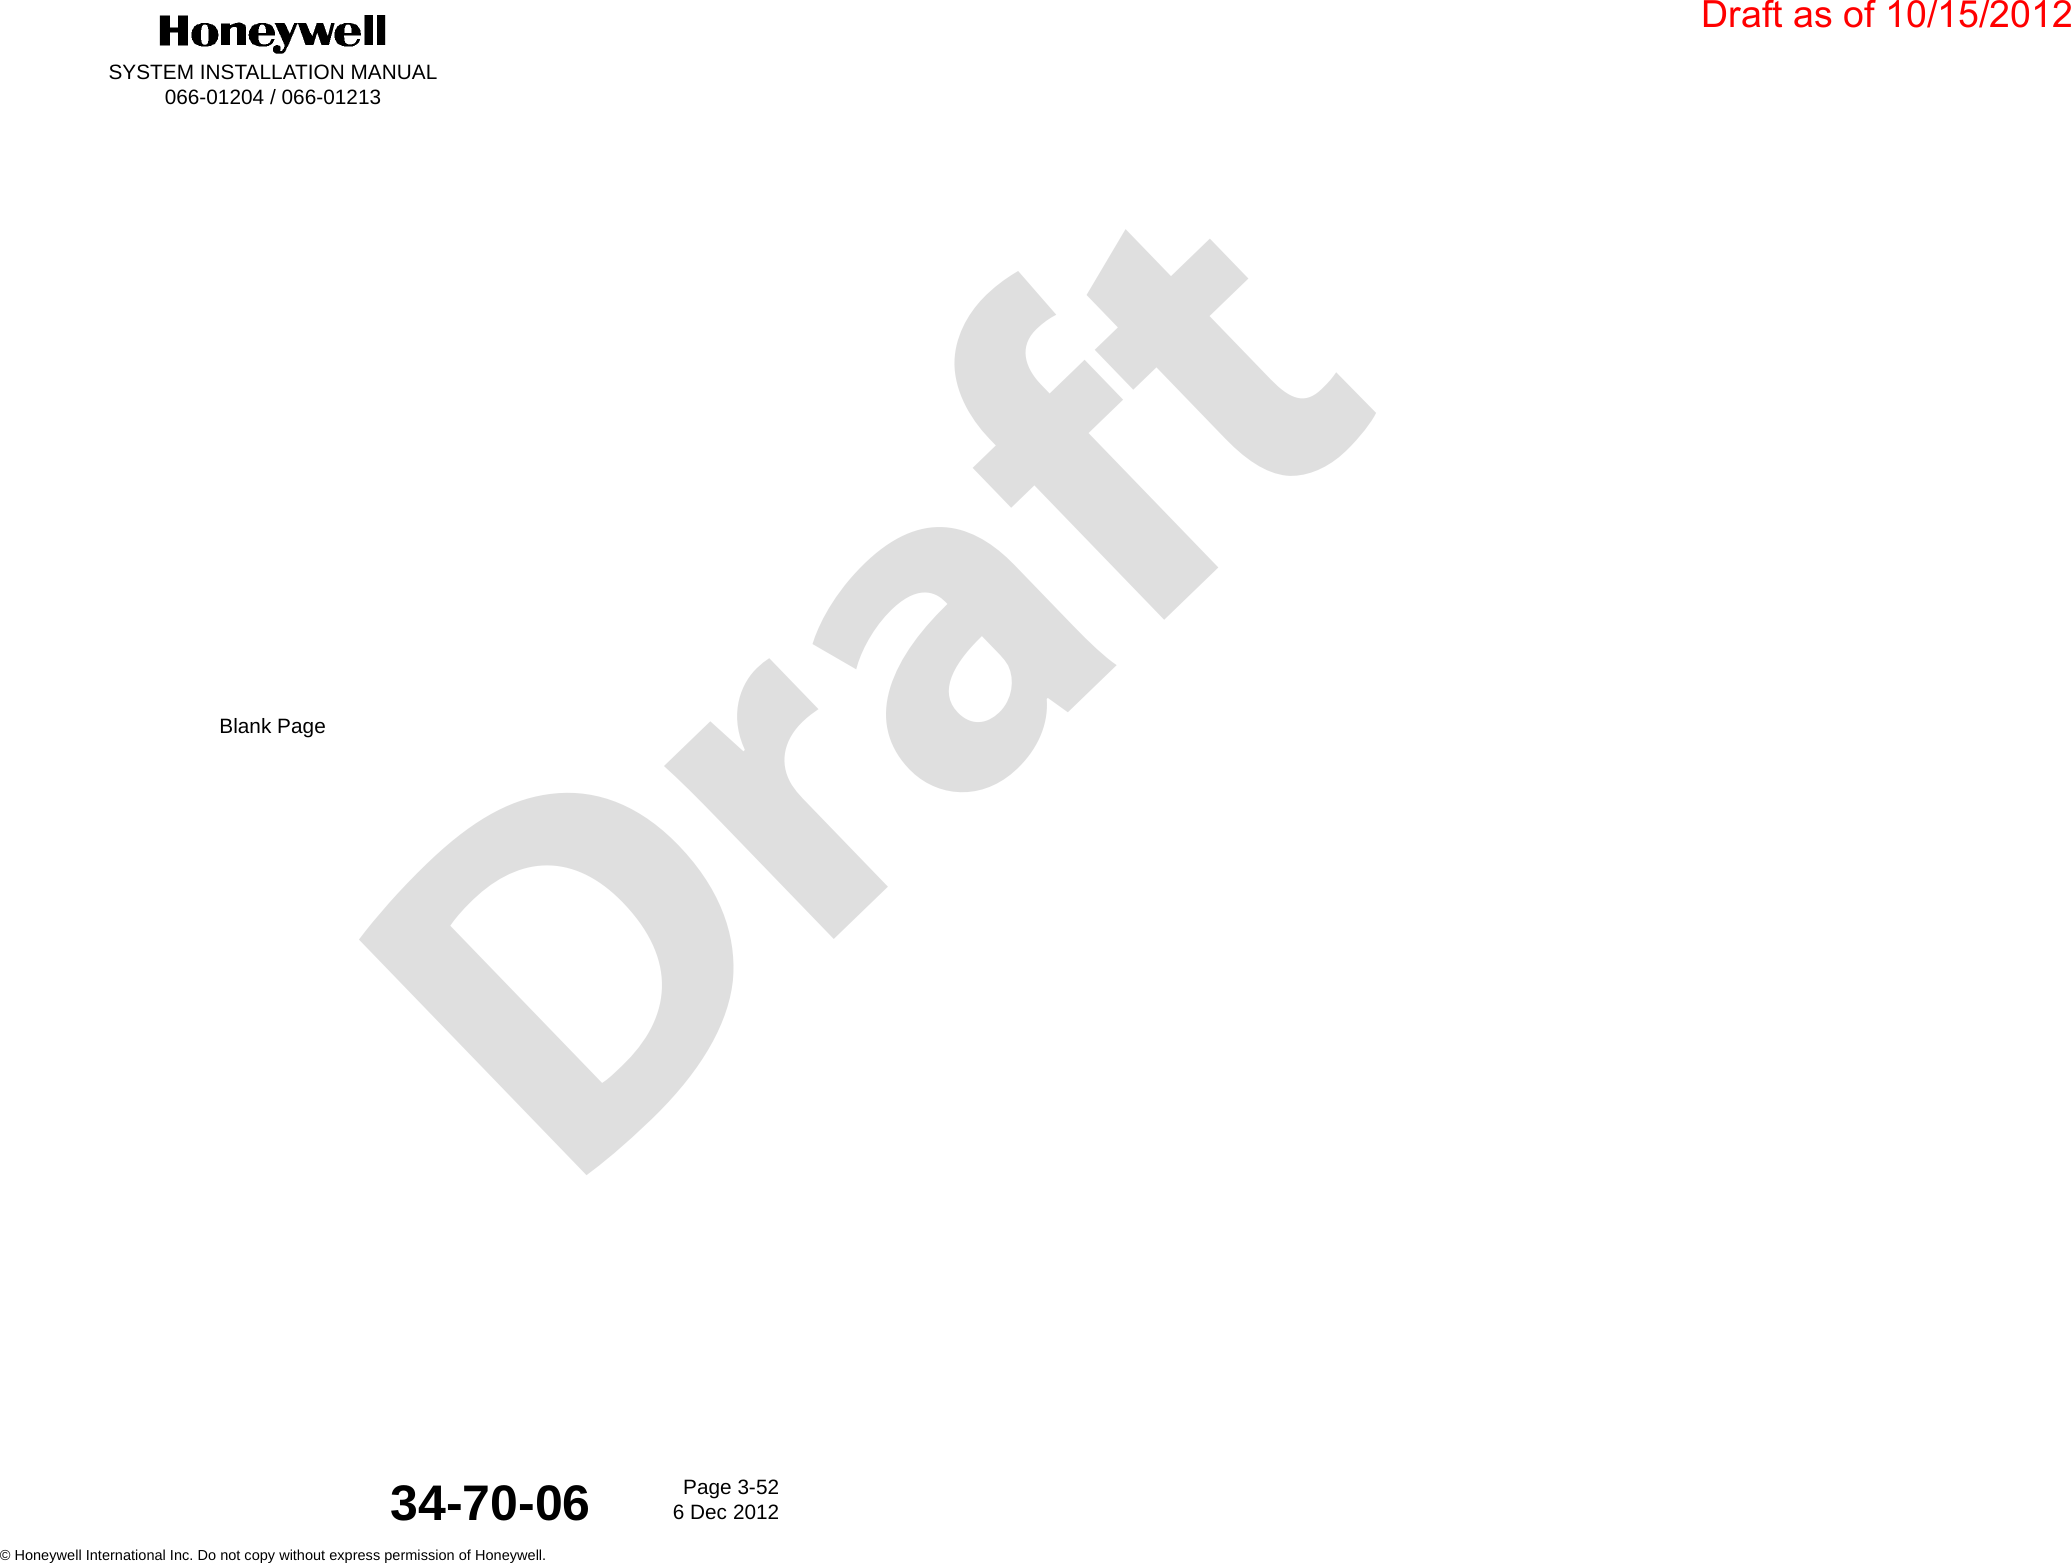 DraftSYSTEM INSTALLATION MANUAL066-01204 / 066-01213Page 3-526 Dec 2012© Honeywell International Inc. Do not copy without express permission of Honeywell.34-70-06Blank PageDraft as of 10/15/2012